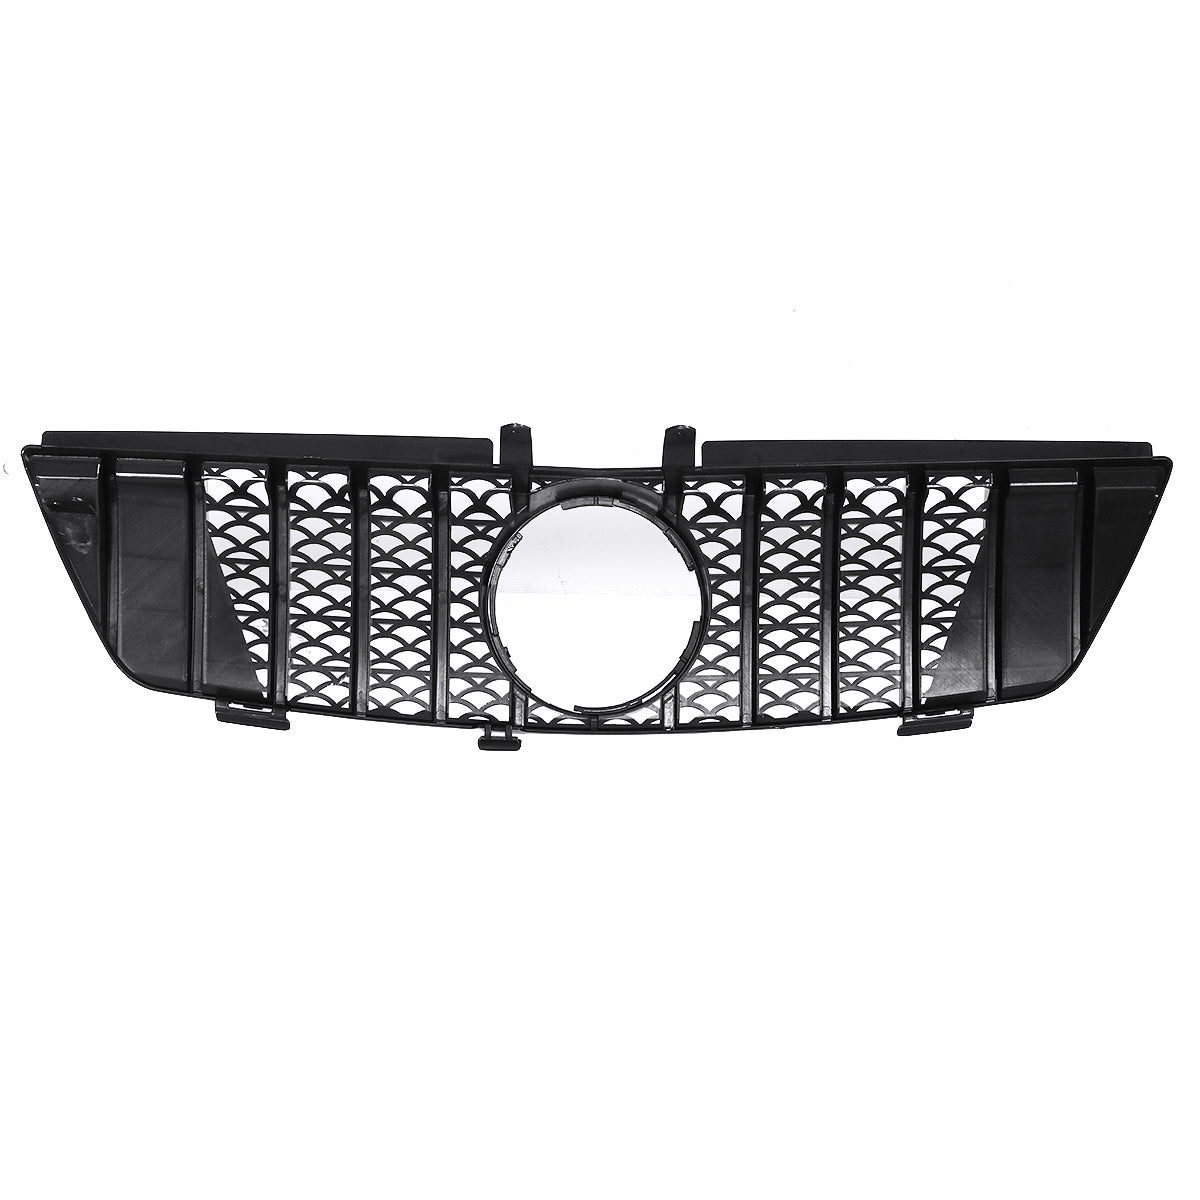 Dark Slate Gray Glossy Black GTR Style Front Grill Grille For Mercedes-Benz ML Class W164 ML320 ML350 ML550 2005-2008